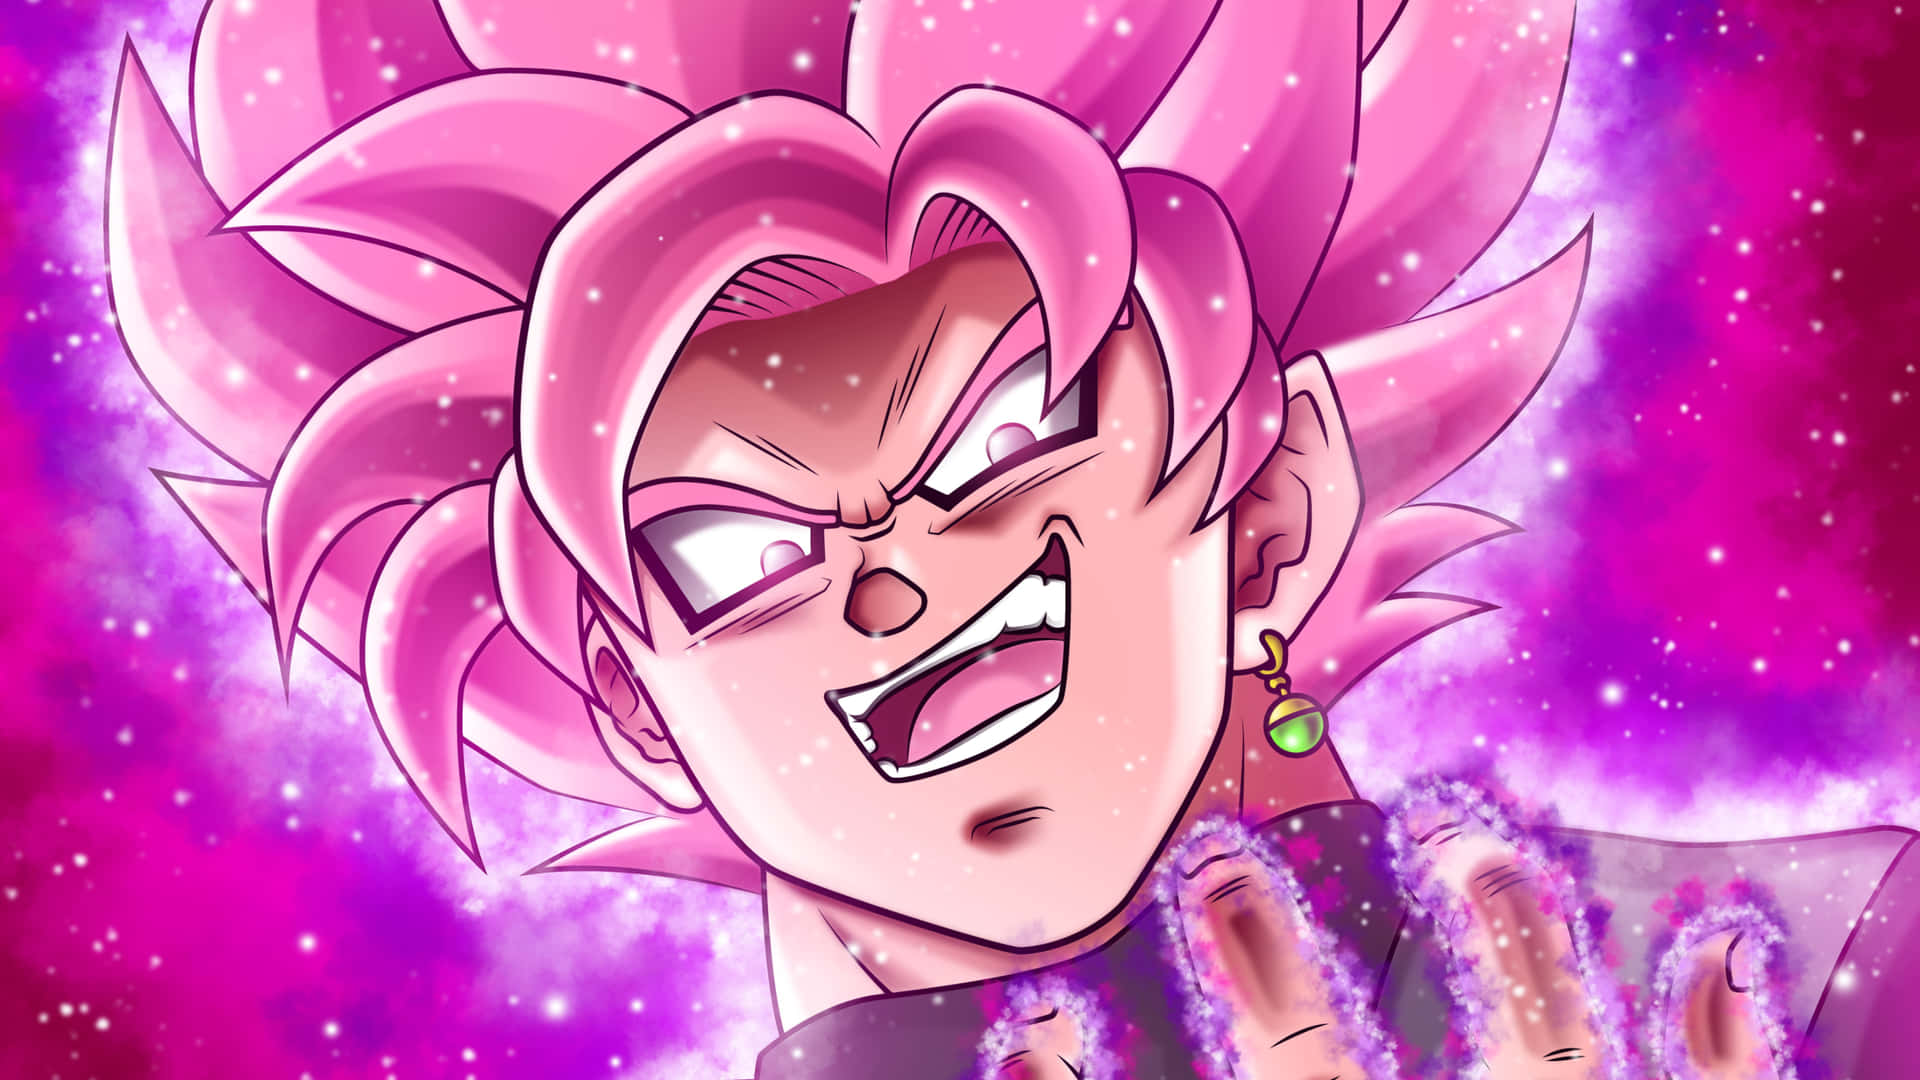 Get Ready To Unleash Ultimate Power With Goku Black In 4k Quality